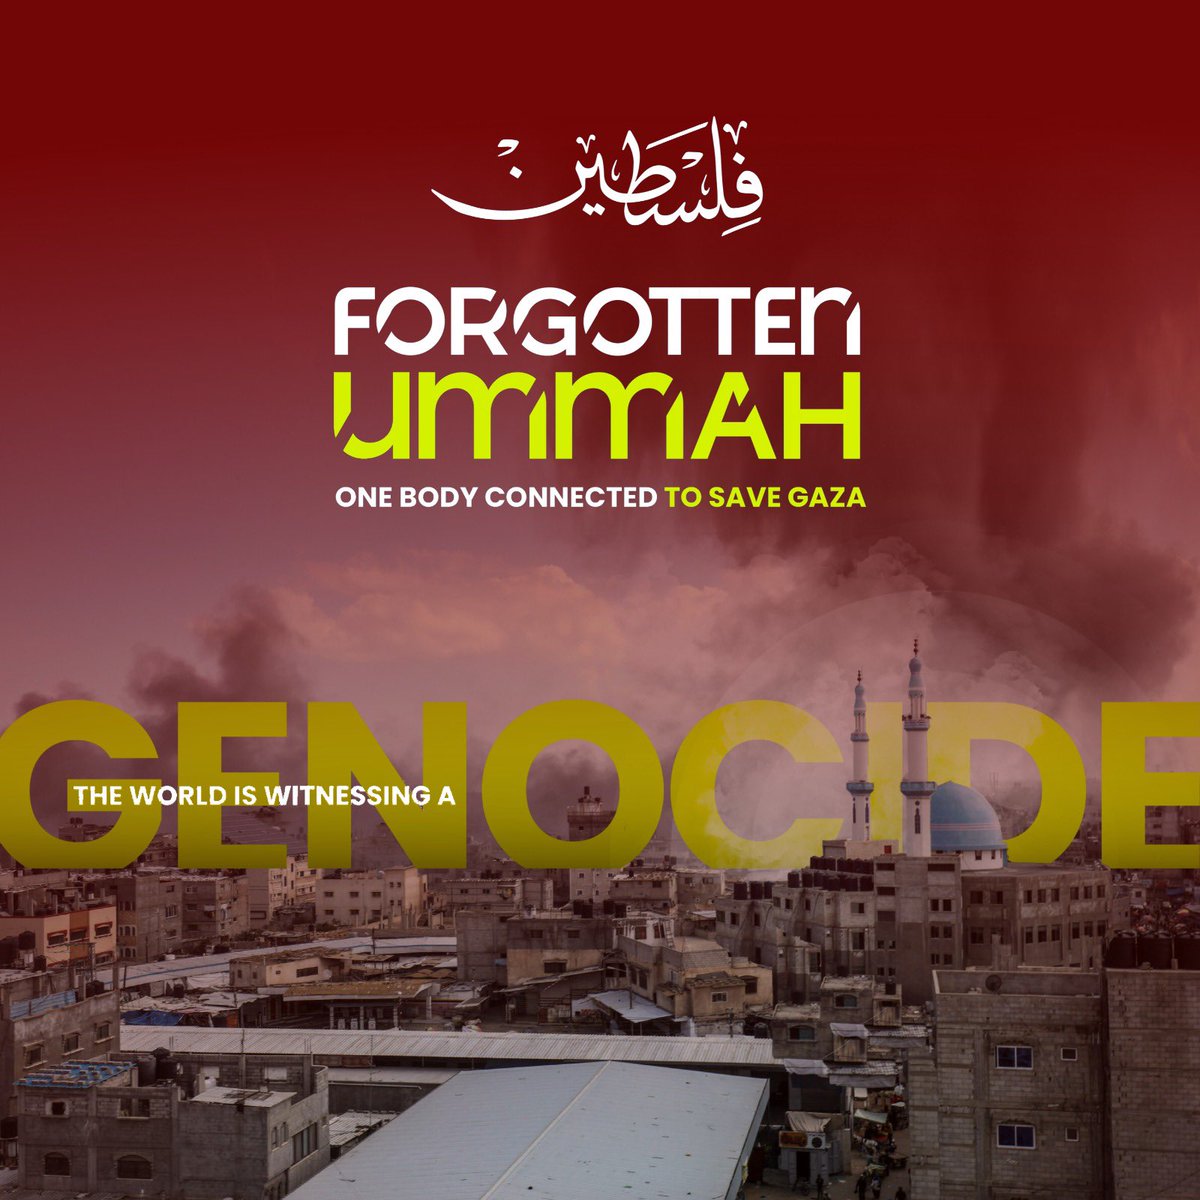 Join @forgottenummah this Ramadan in extending our thoughts and support to the people of Gaza, who face unimaginable challenges.

Join us in this noble endeavor to support Gaza this Ramadan. 

muslimgiving.org/OneBodyUnited4…
#RamadanWithGaza #SupportForPeace #BridgeToRelief